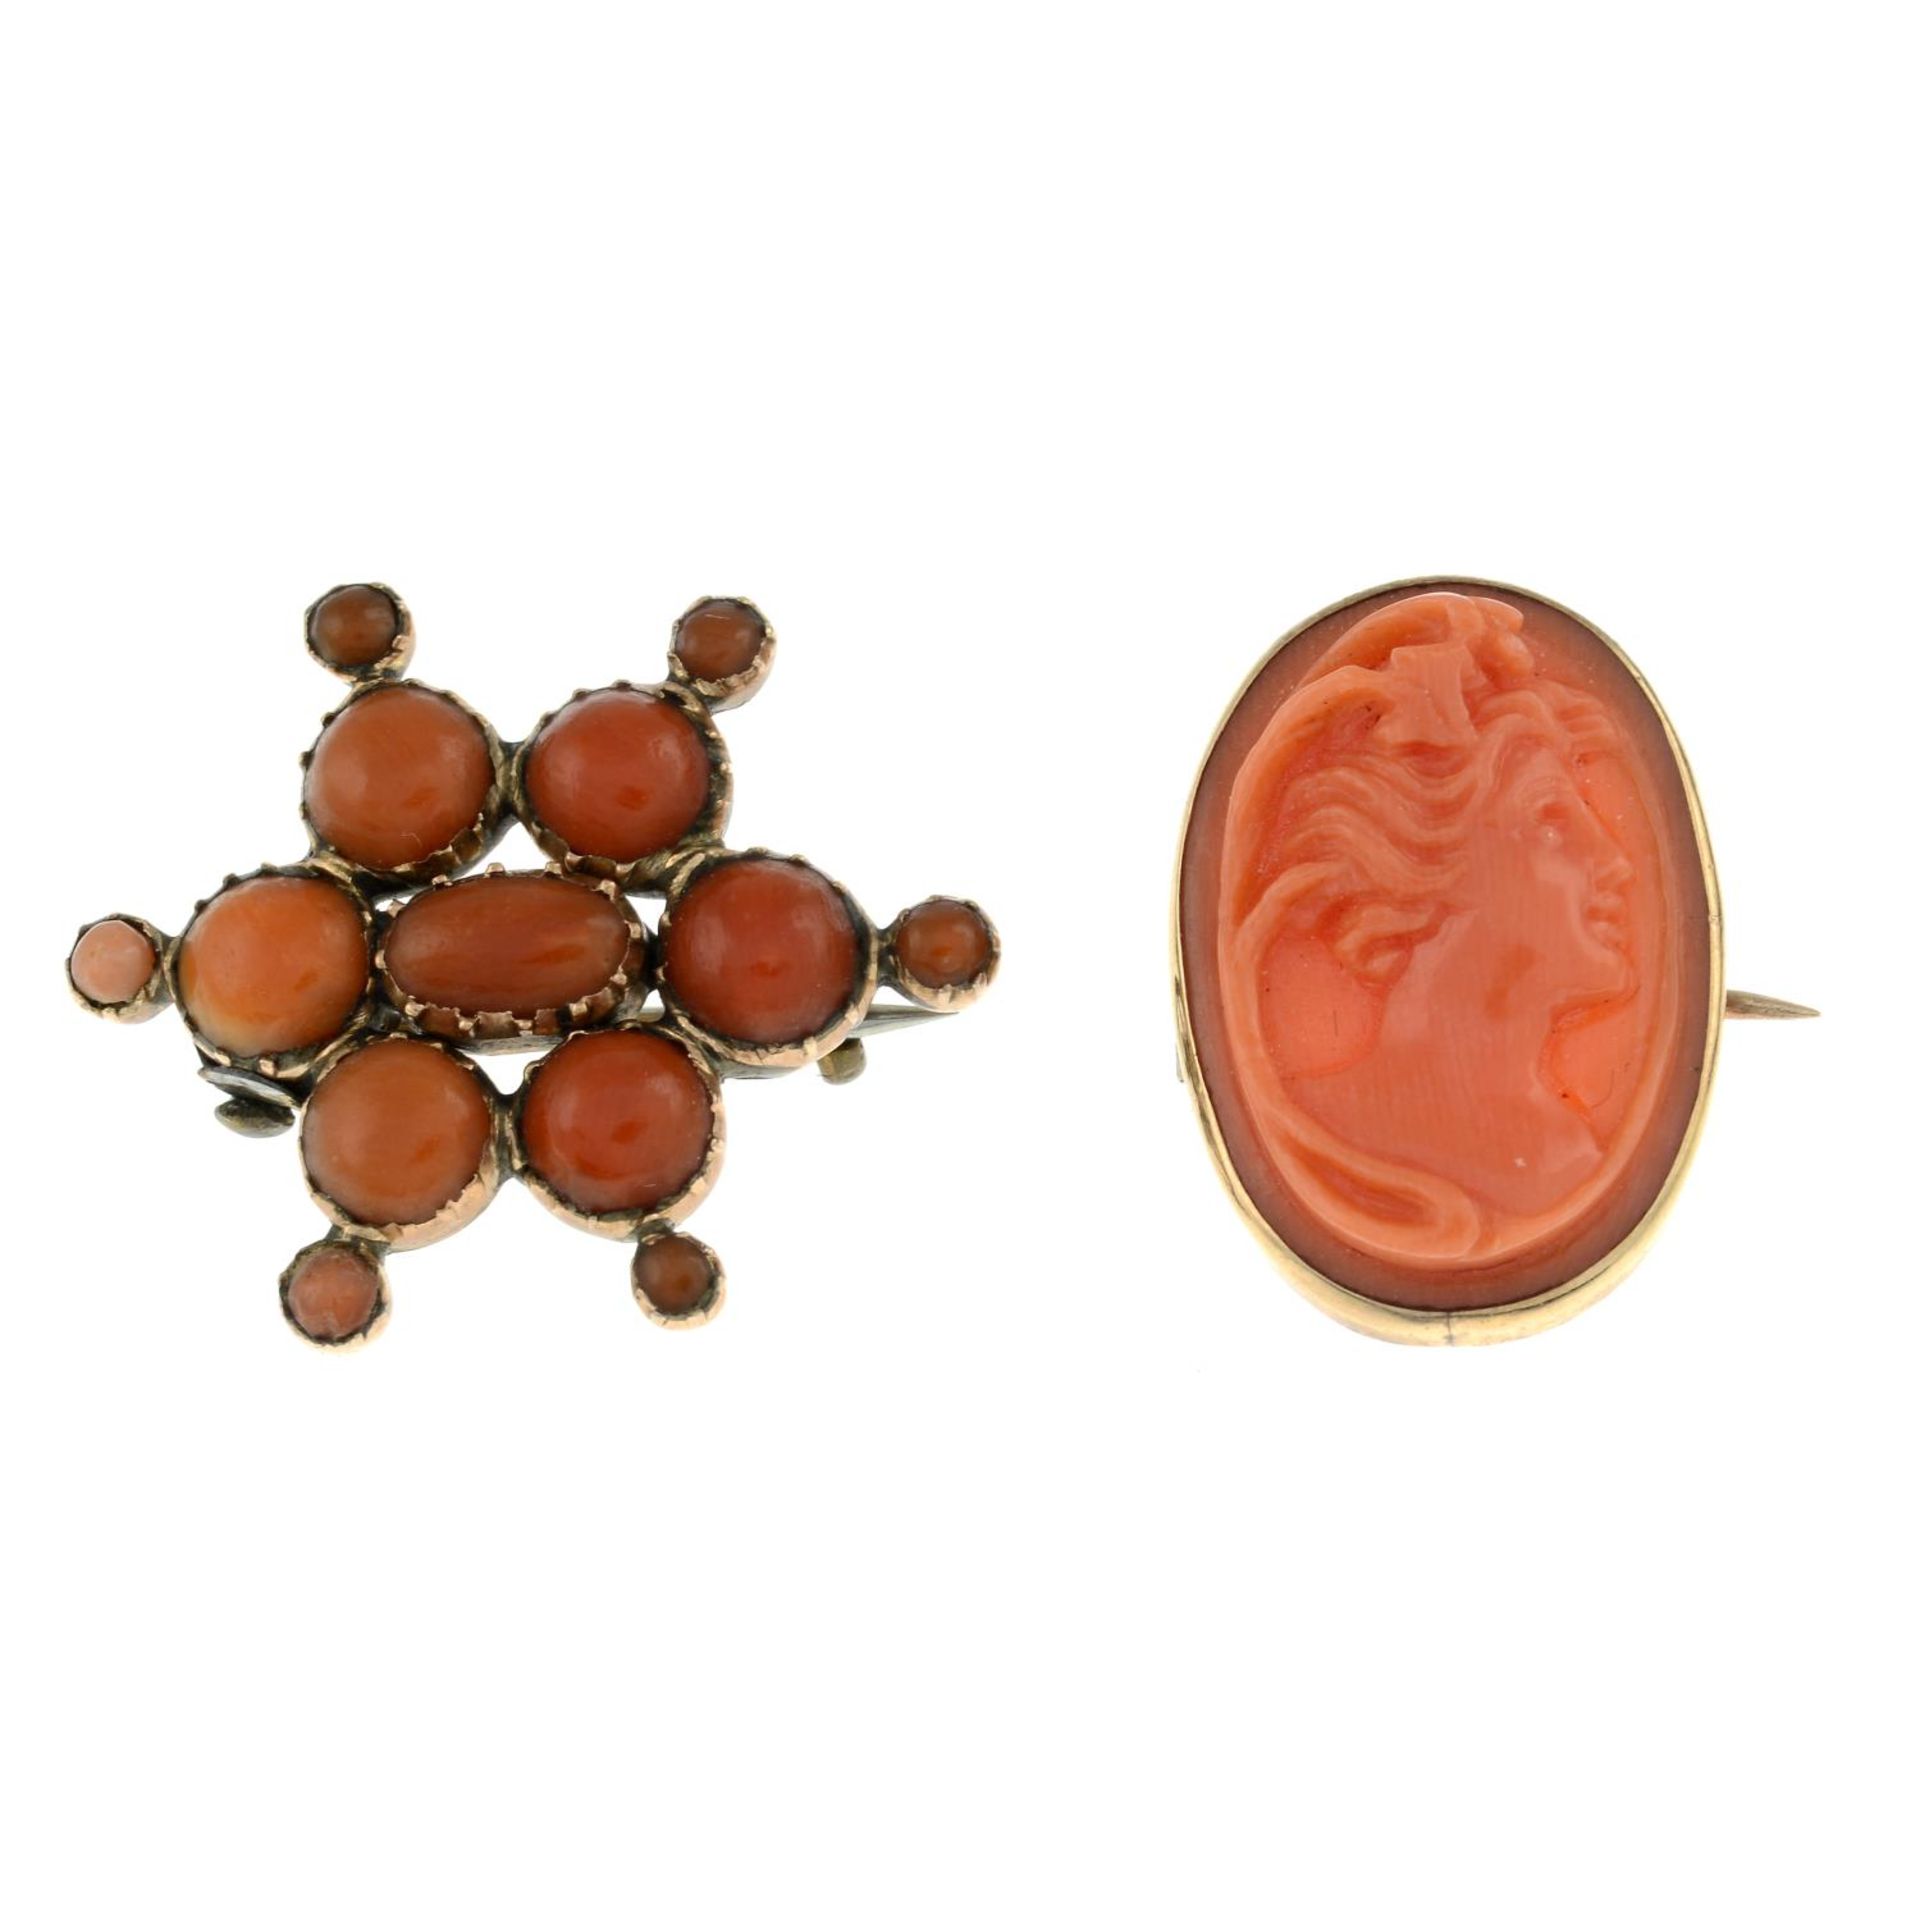 Later 19th century coral cluster brooch, length 2.7cms, 3.5gms.